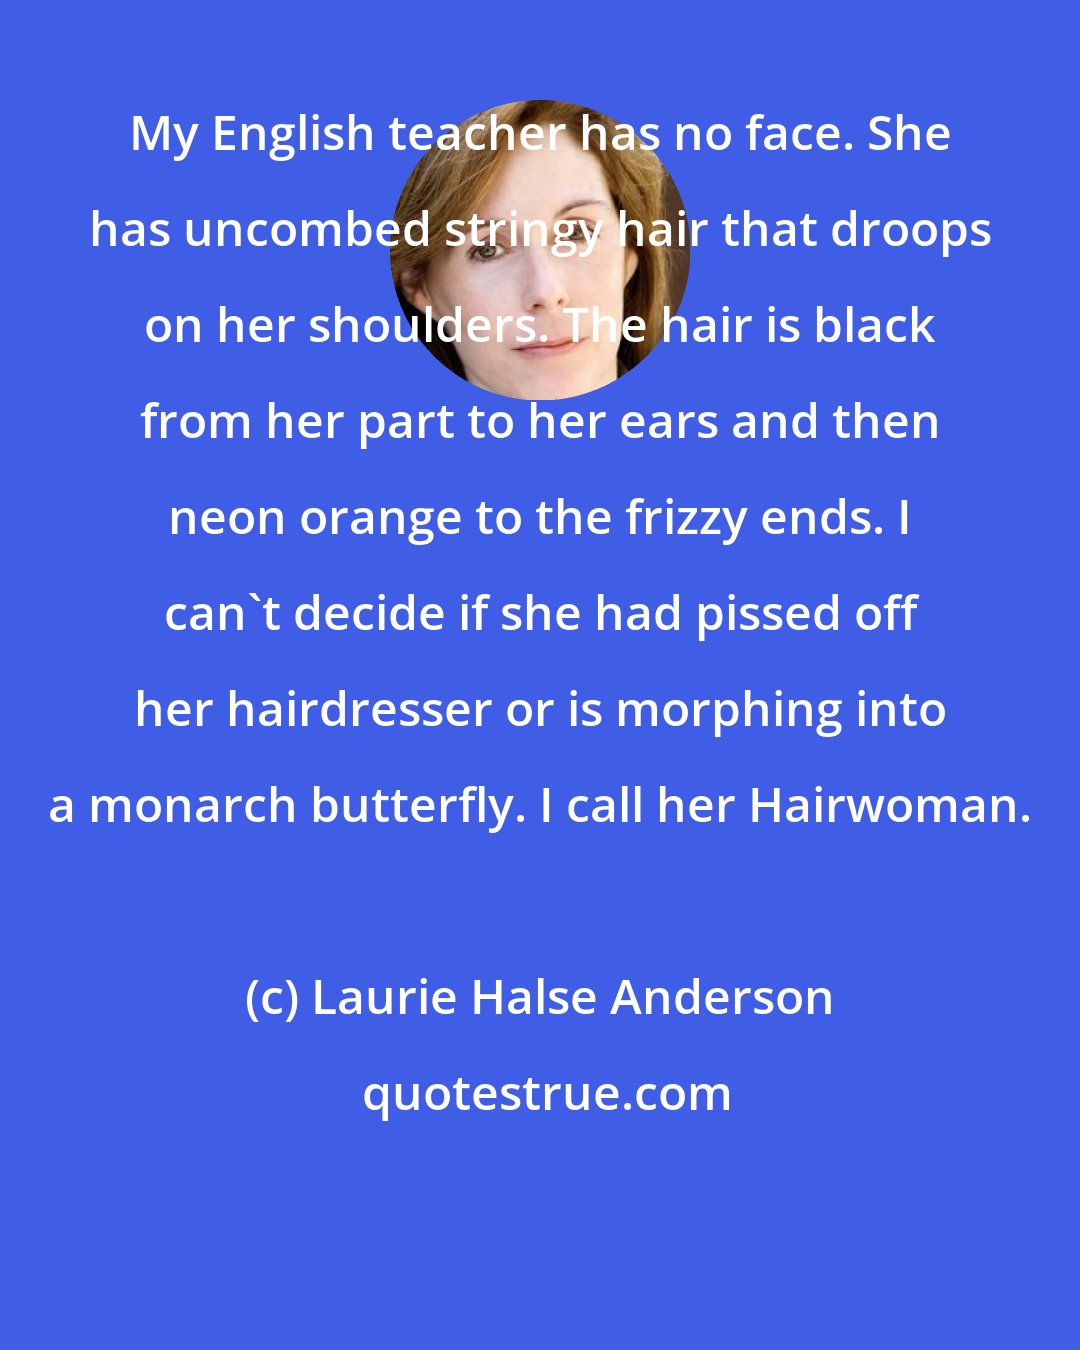 Laurie Halse Anderson: My English teacher has no face. She has uncombed stringy hair that droops on her shoulders. The hair is black from her part to her ears and then neon orange to the frizzy ends. I can't decide if she had pissed off her hairdresser or is morphing into a monarch butterfly. I call her Hairwoman.